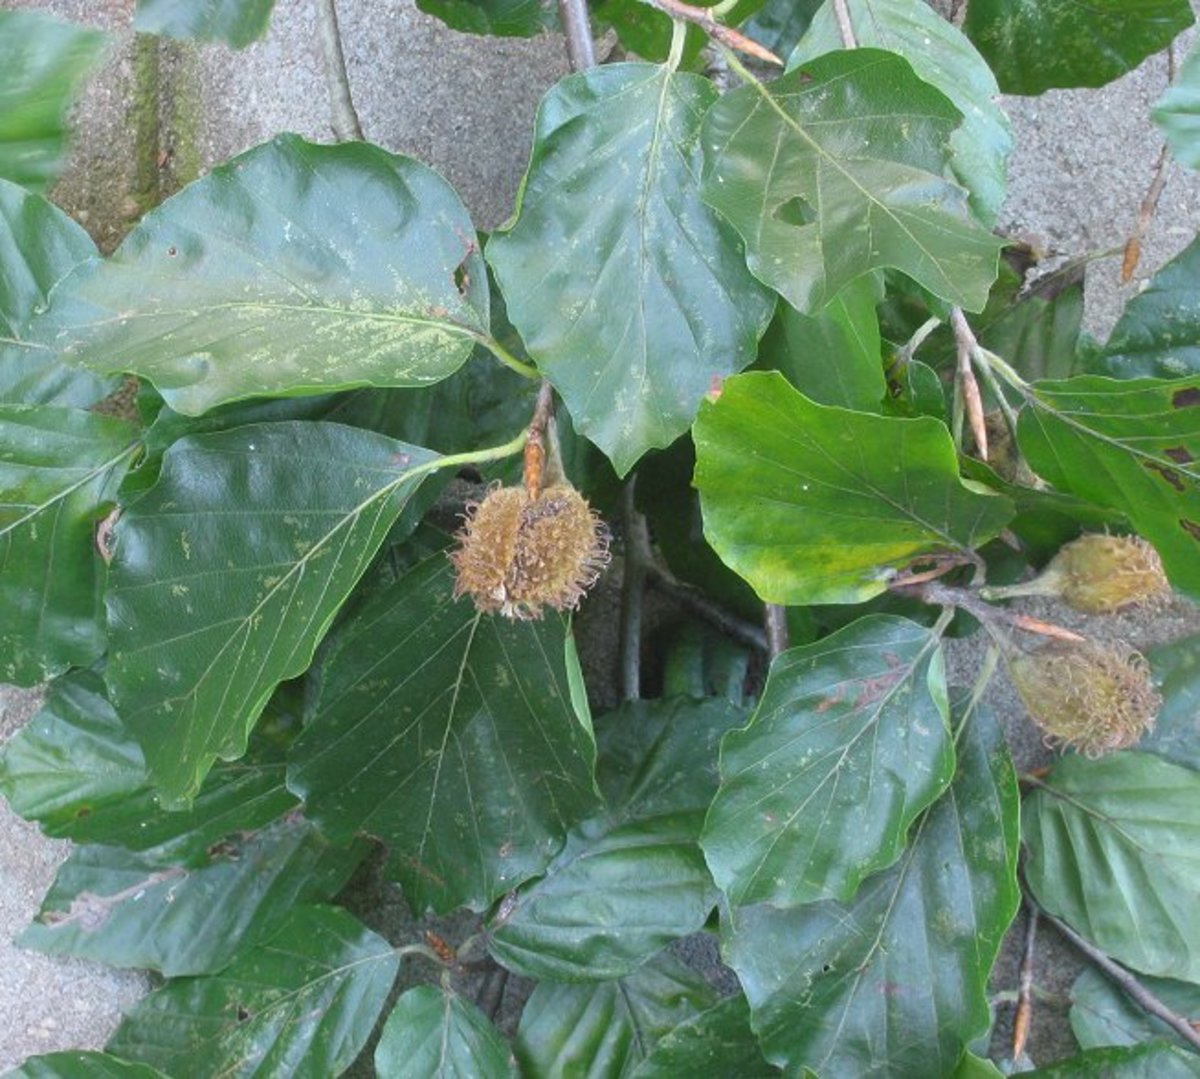 Beech leaves and nut shells.